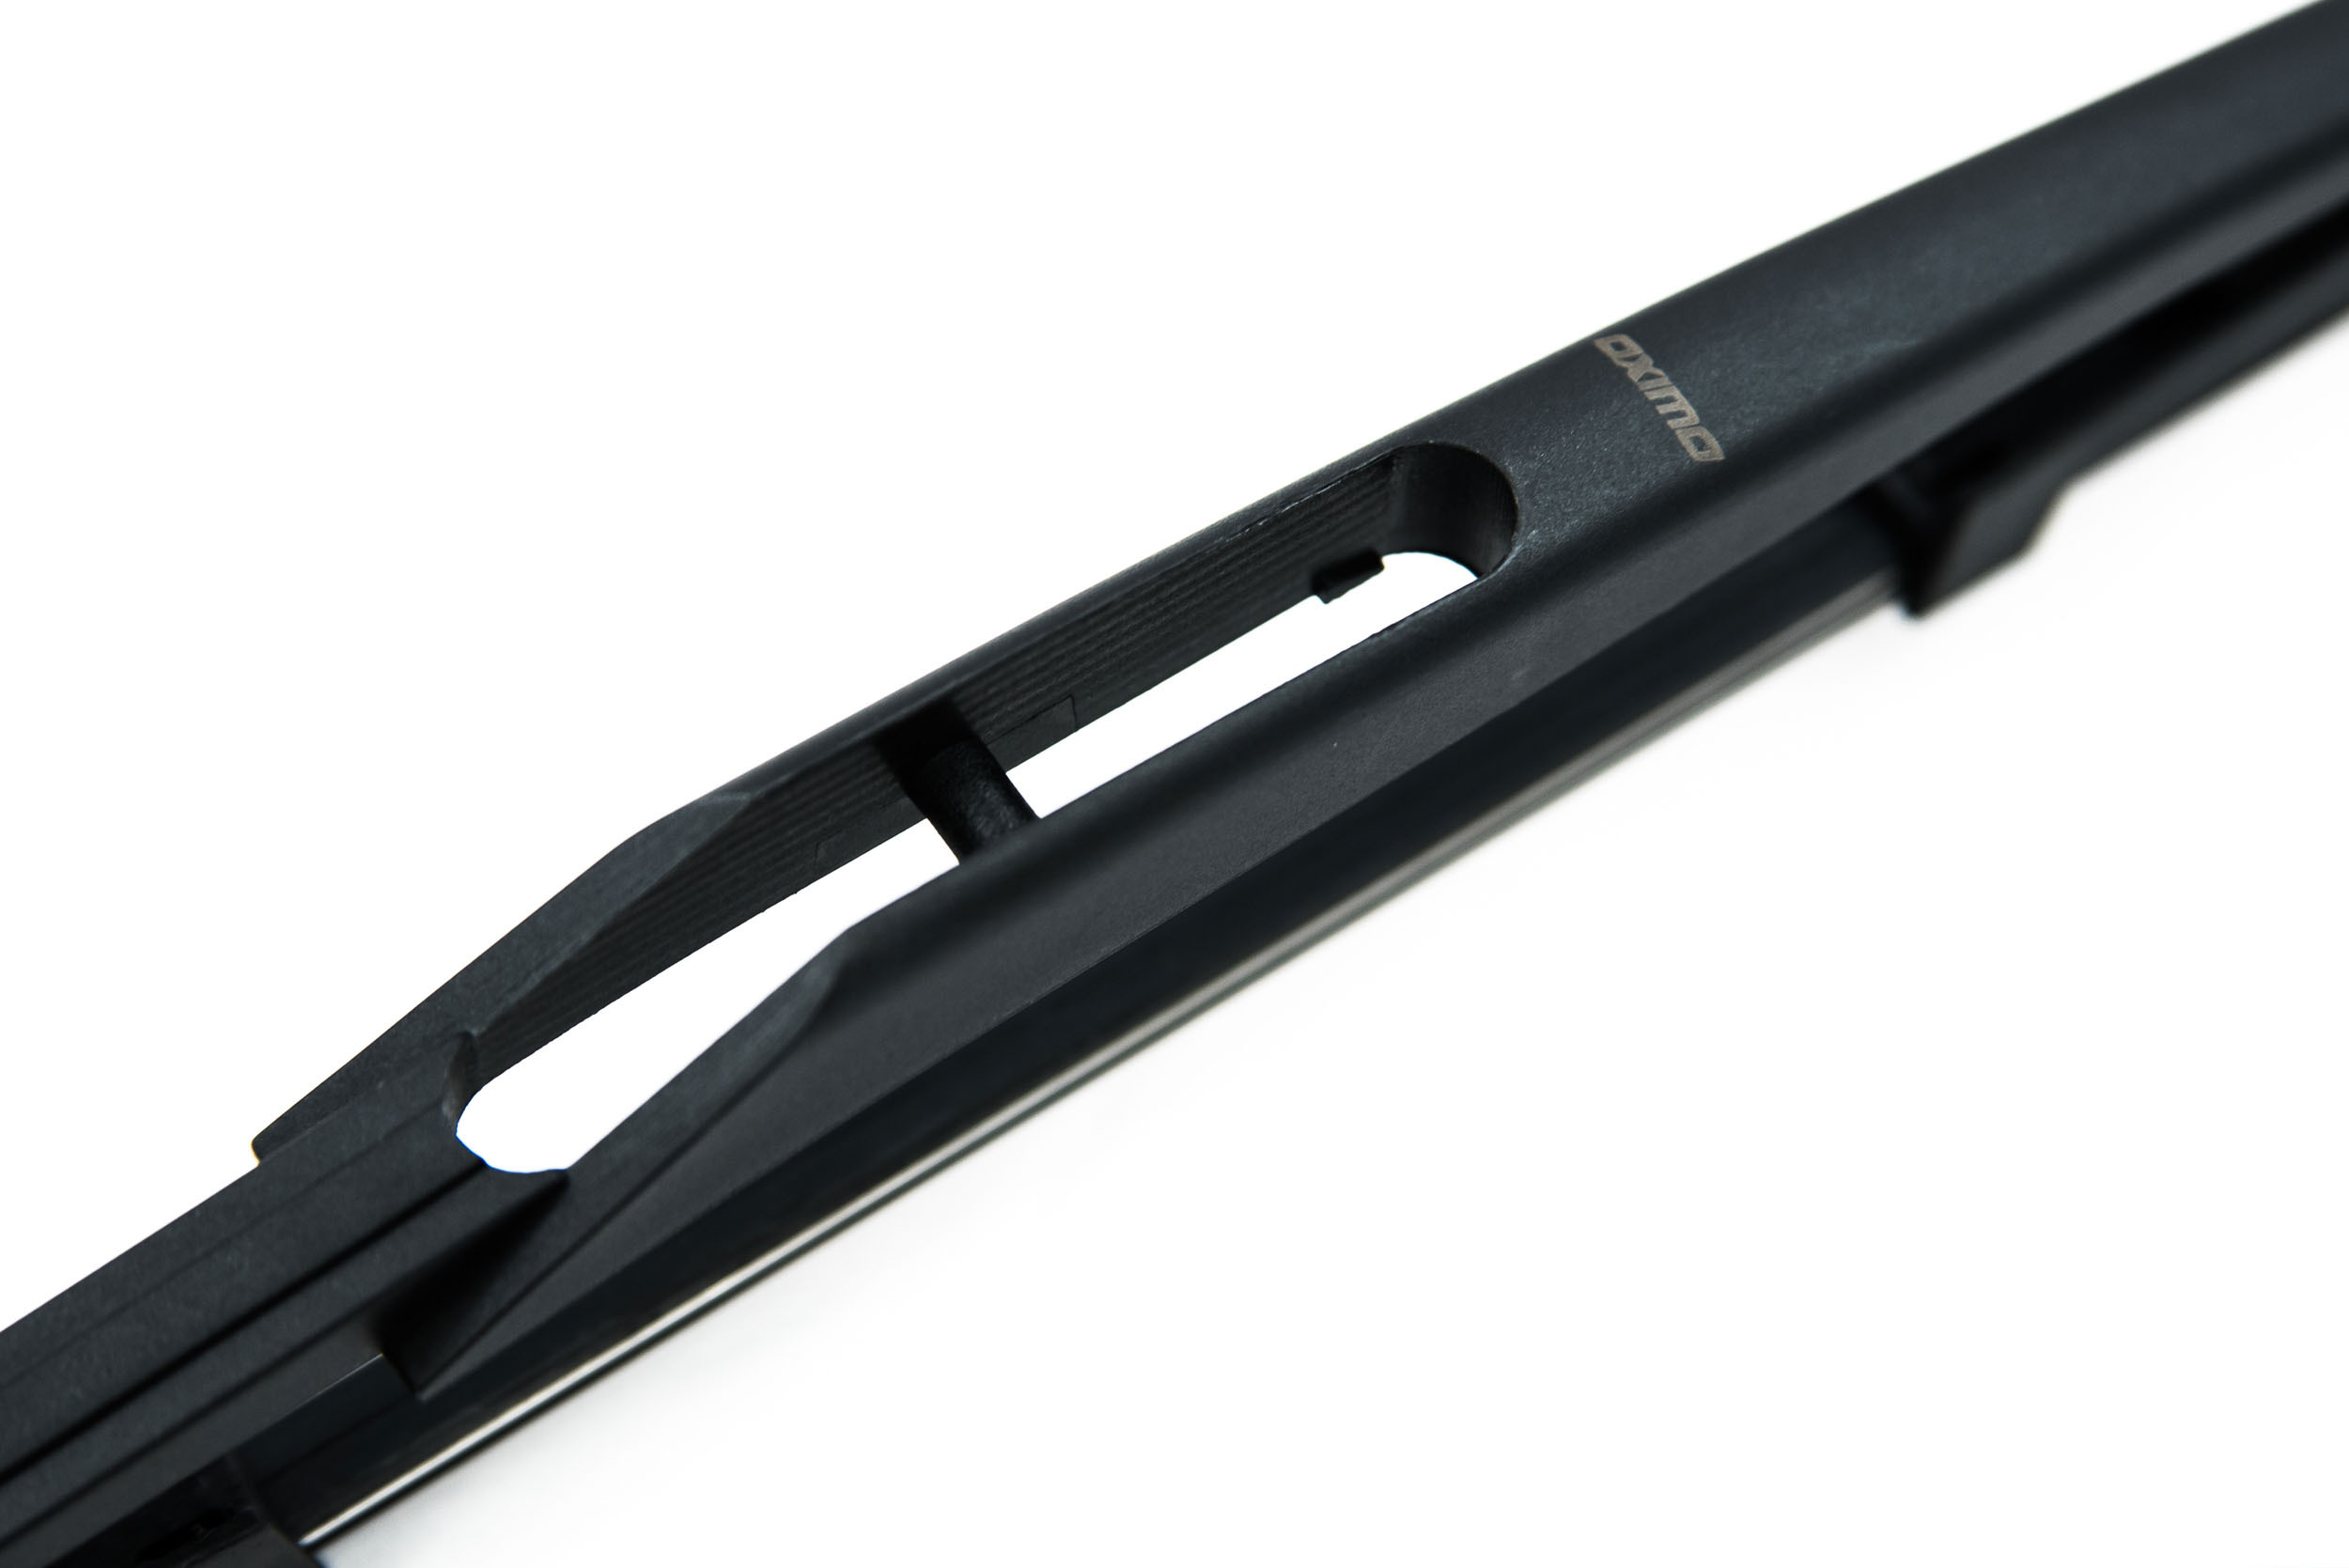 Rear dedicated silicon wiperblade 360 mm